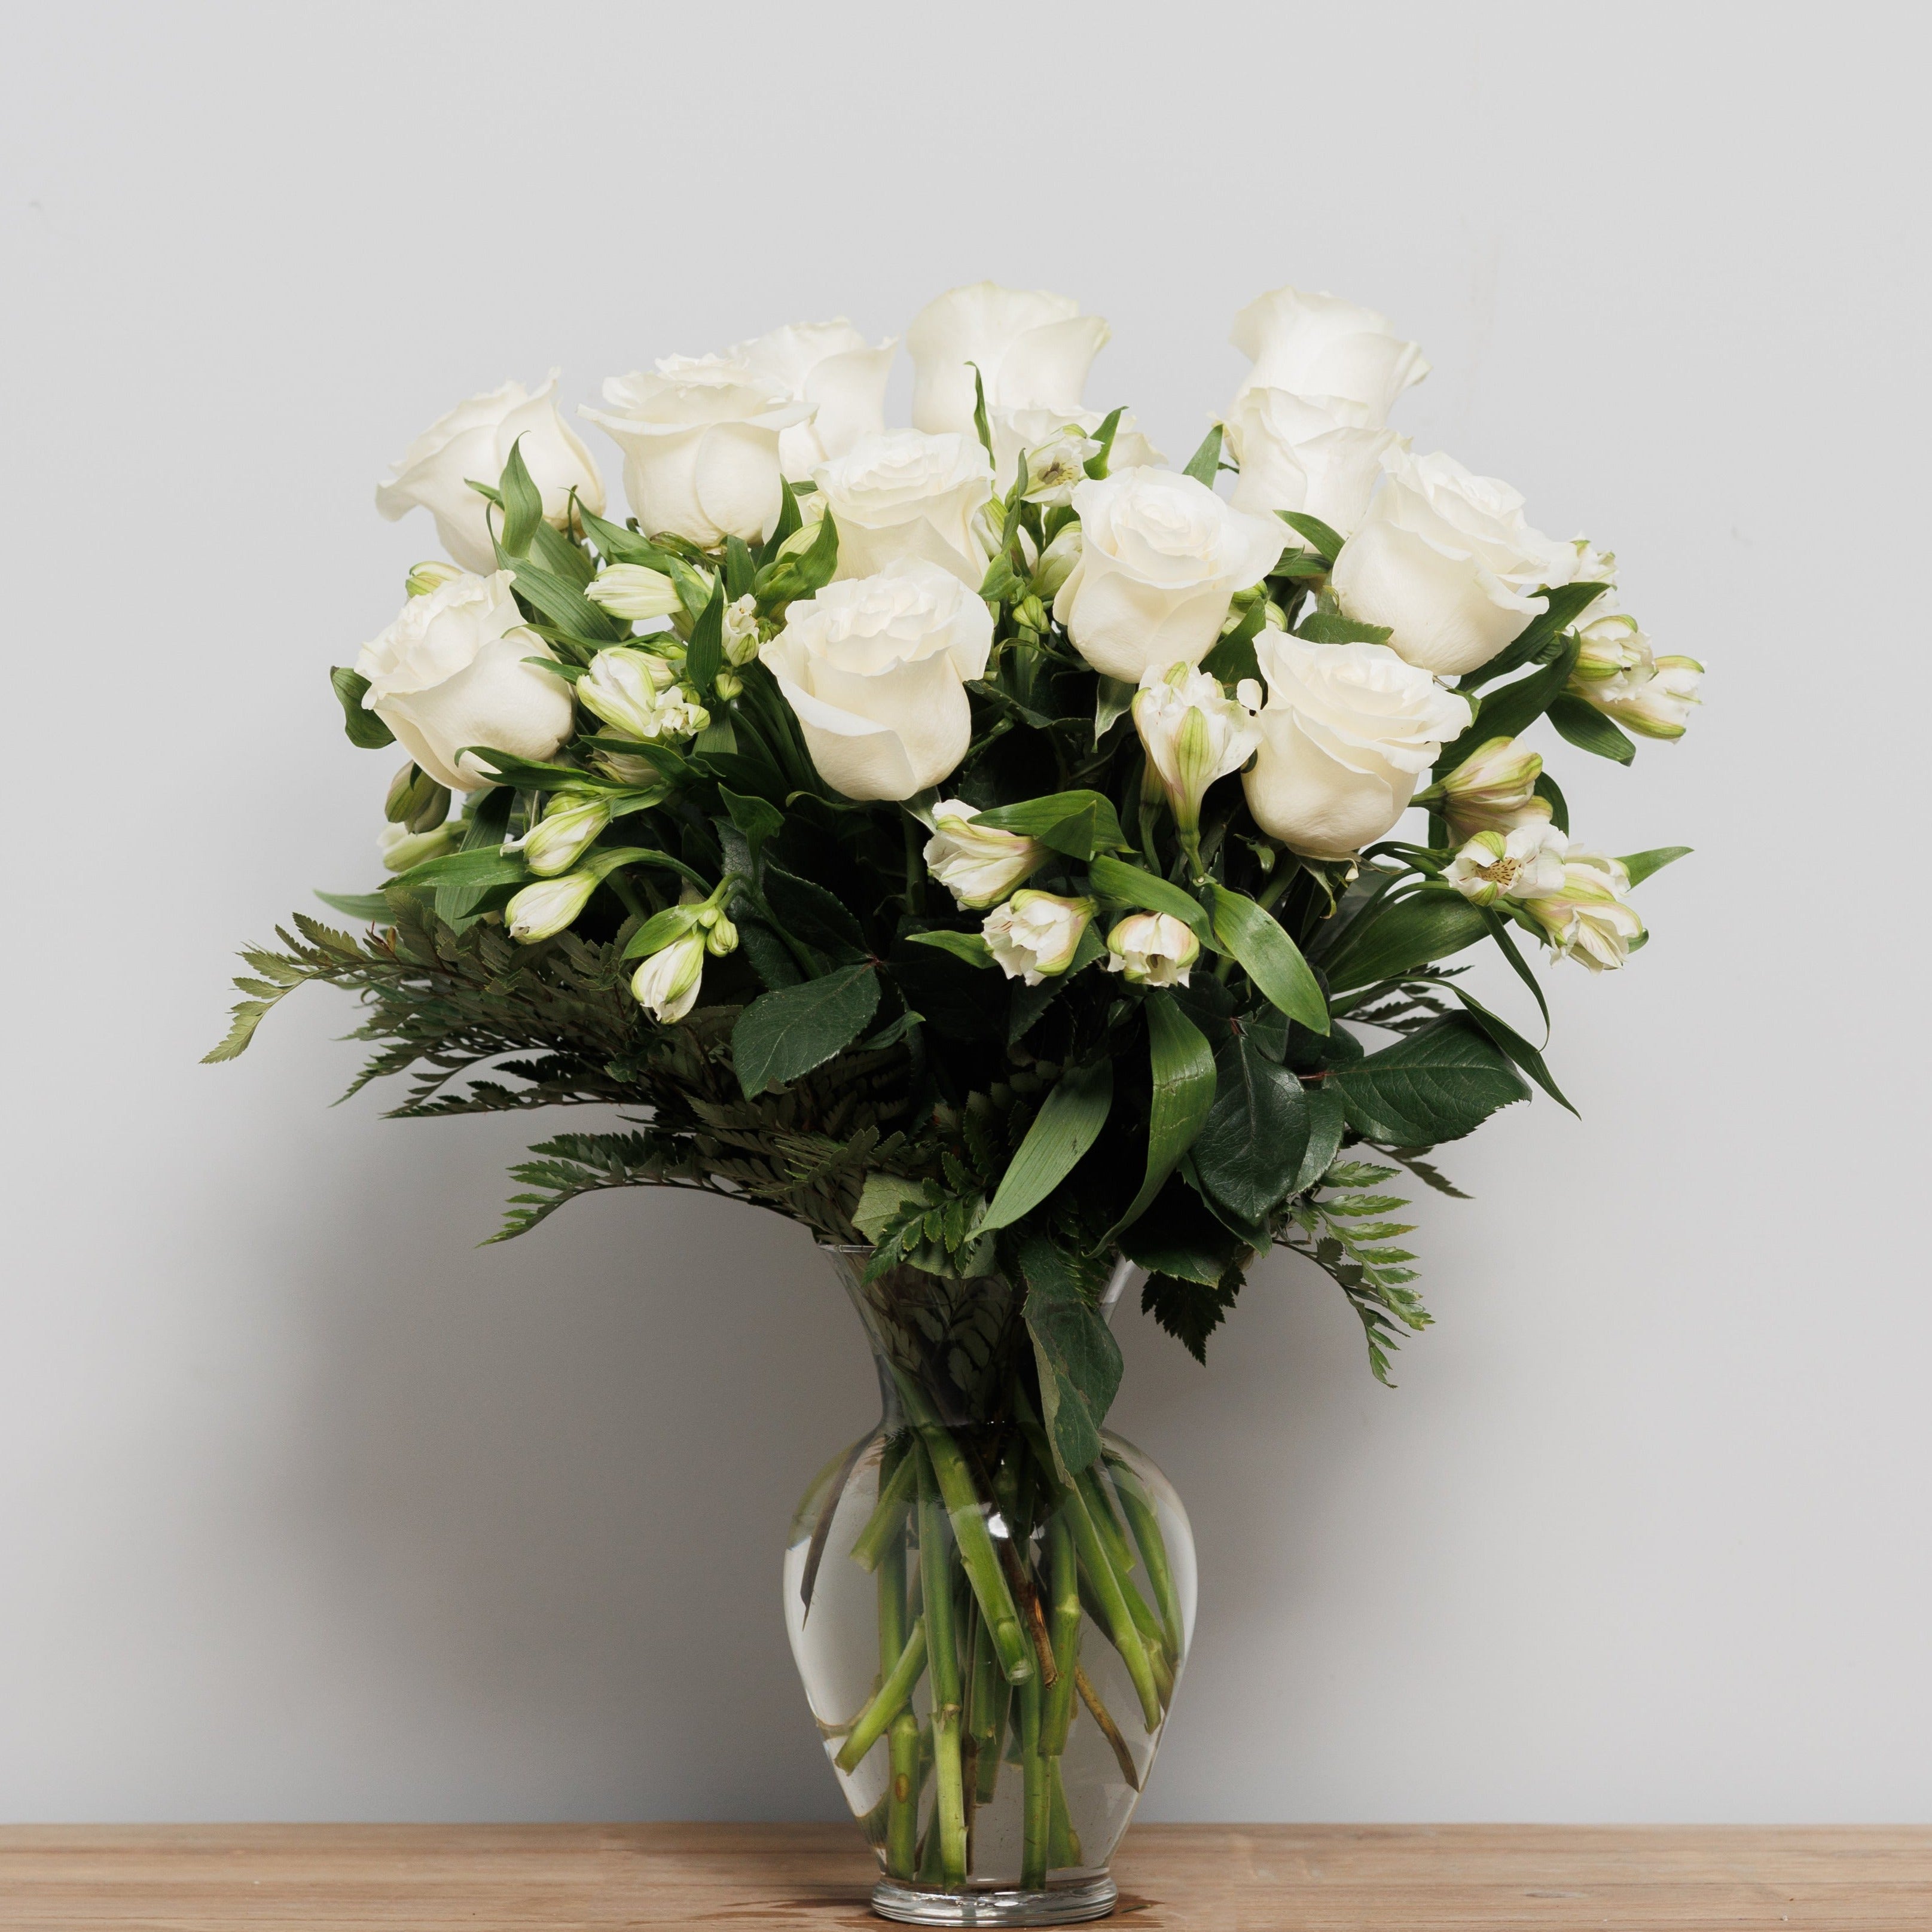 A vase arrangement with white roses and white alstroemeria.